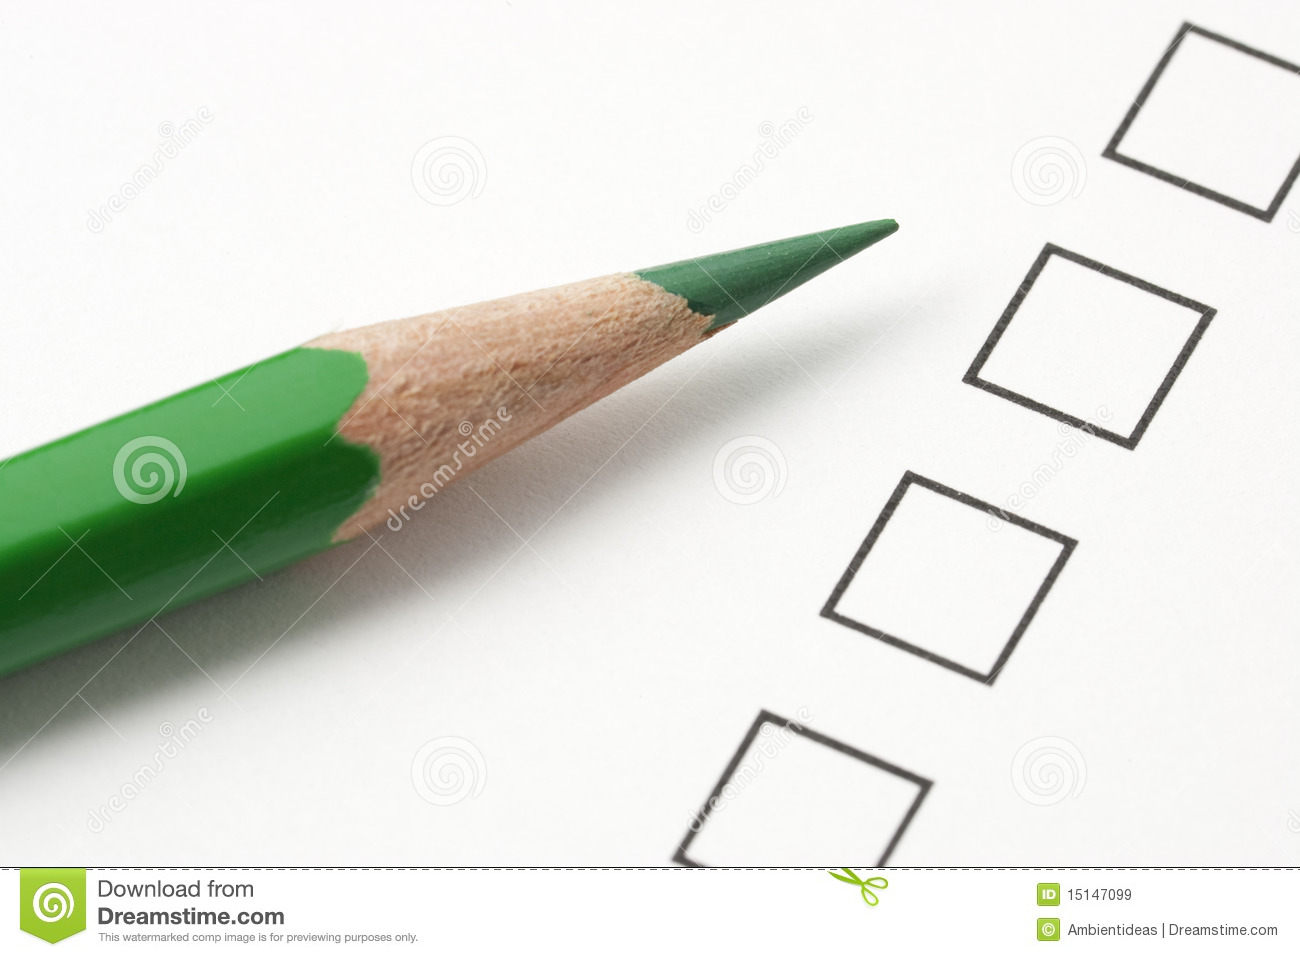 Check Box Survey With Green Pencil  Focus On Tip Of Pencil